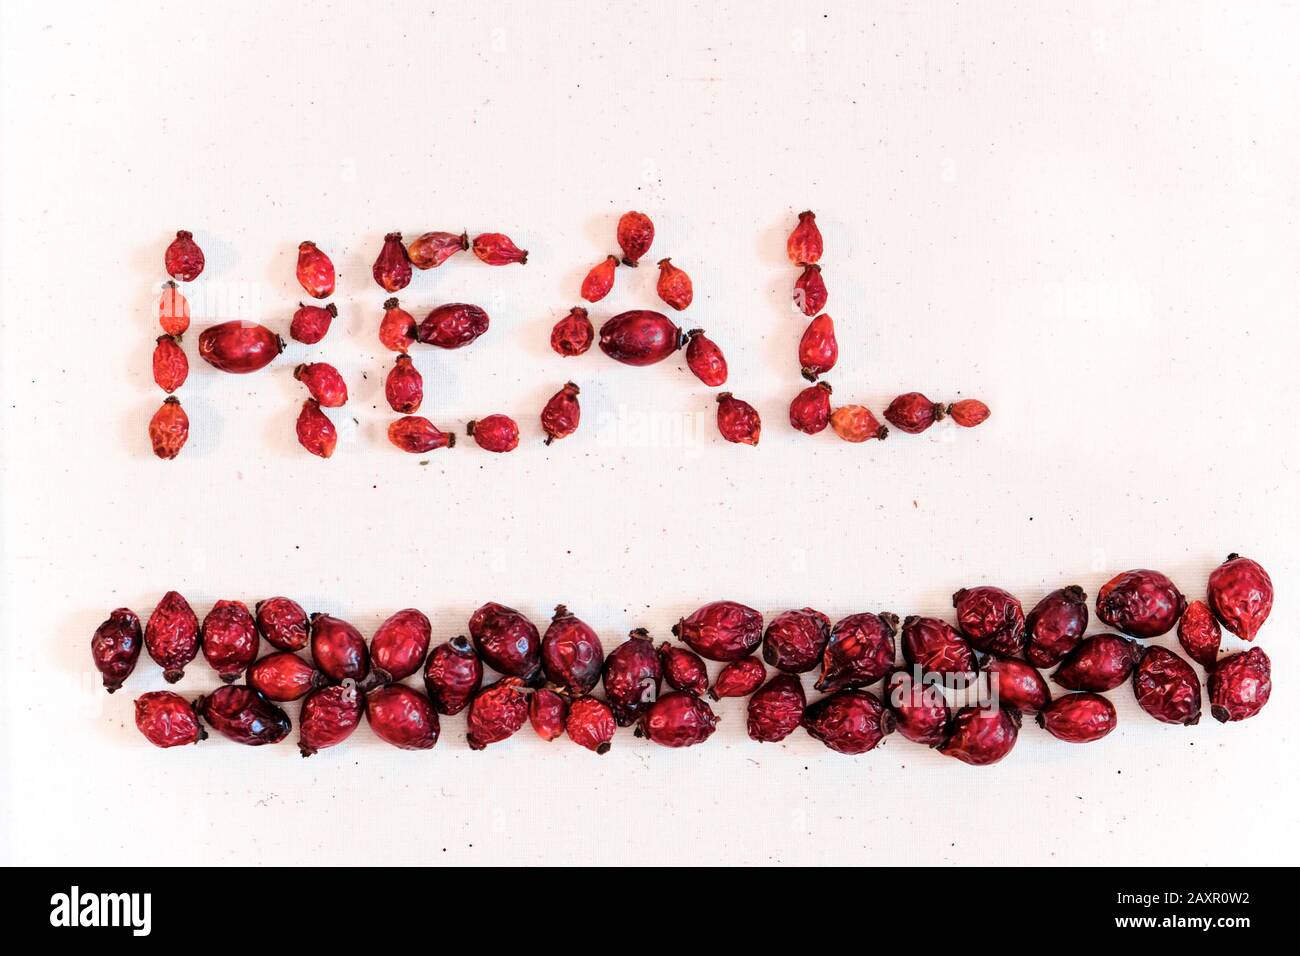 Dried red rose hips (berry, fruit) on white background did word heal Stock Photo